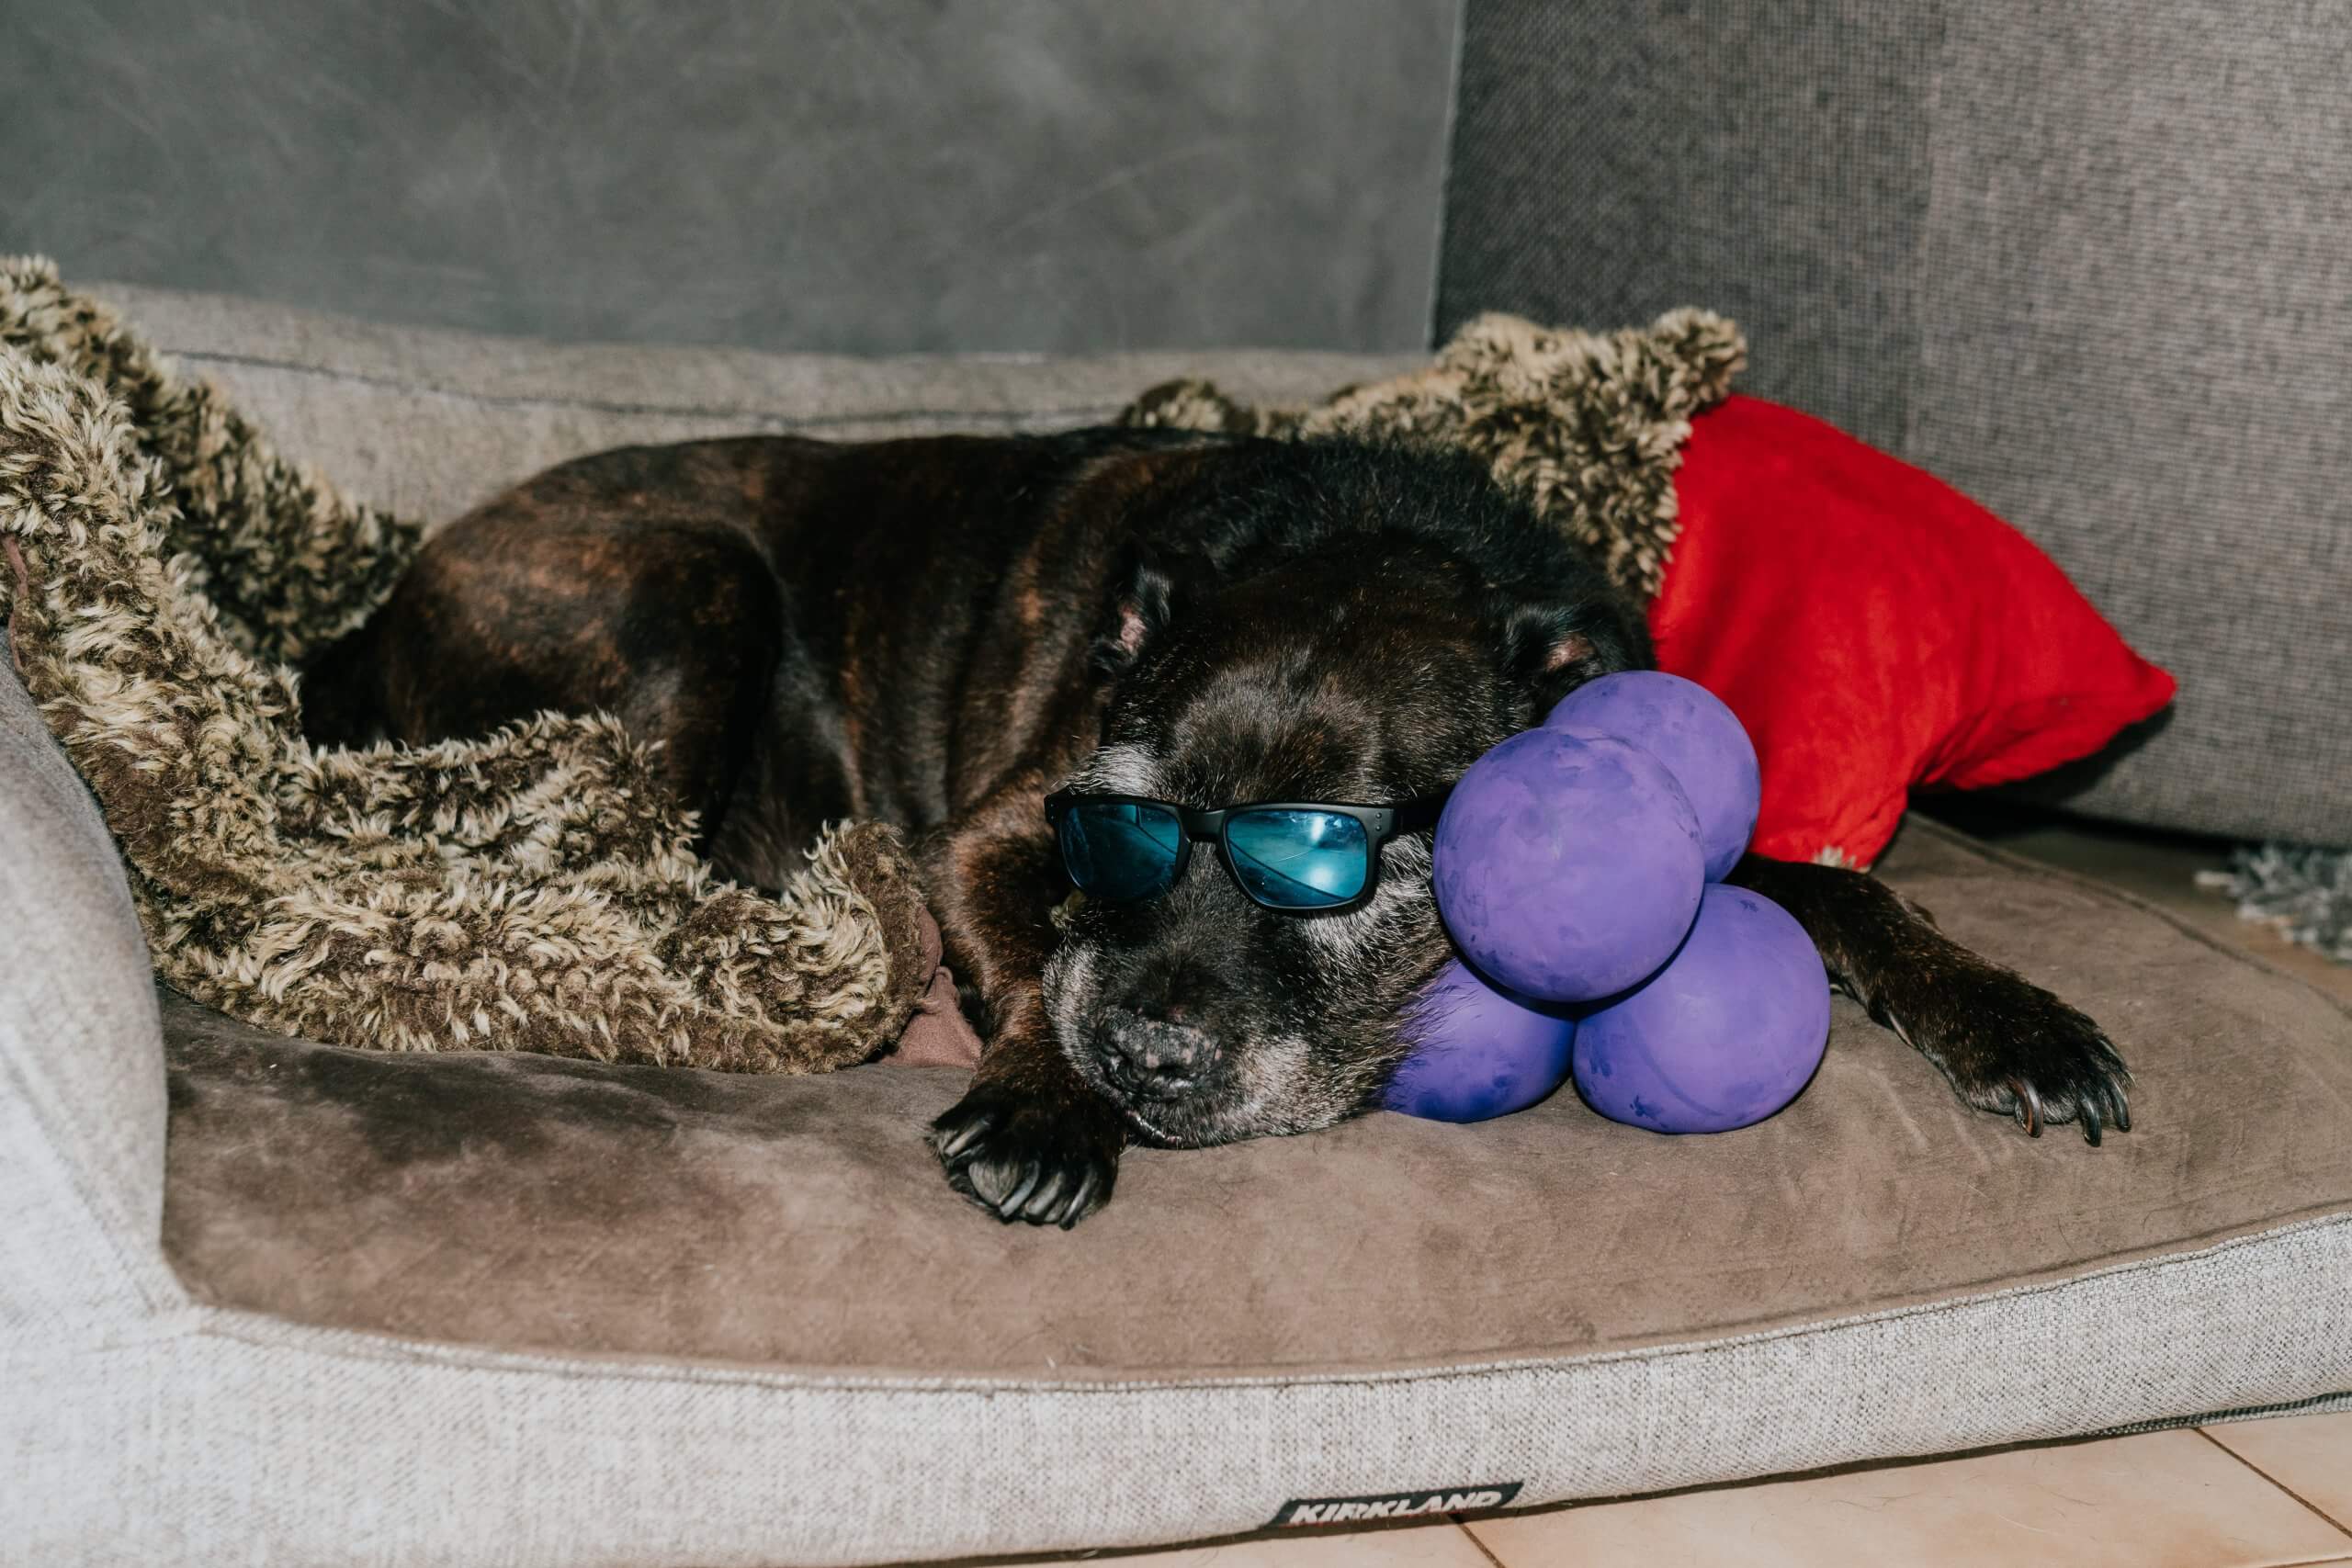 Dog looks cool with his sunglasses on as he lays leisurely in his fluffy bed.